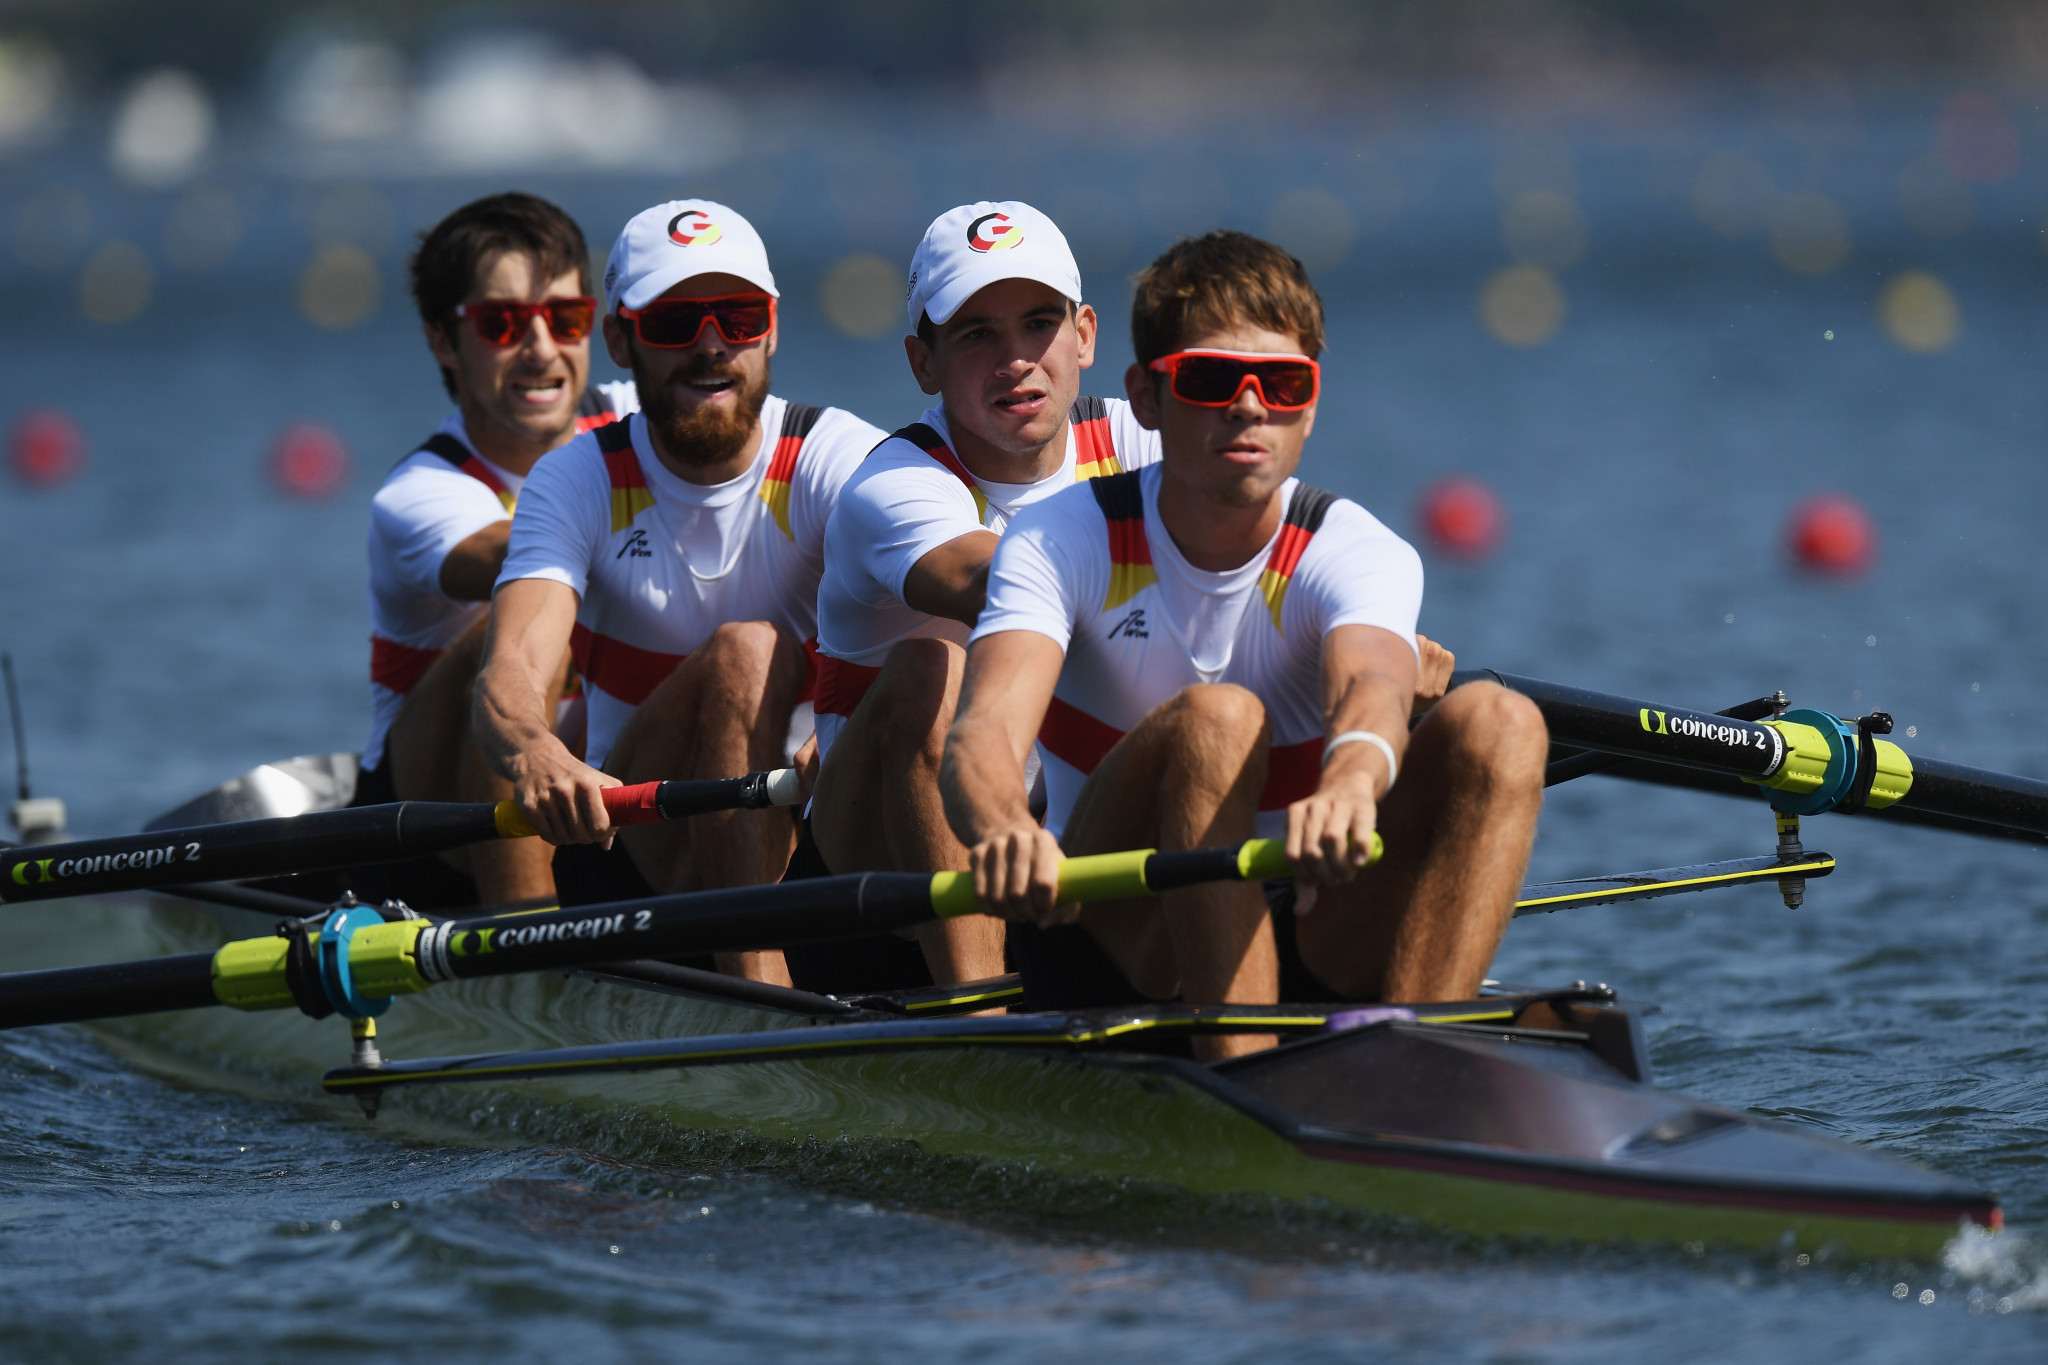 German rower Jonathan Koch said the IOC has no reason not to distribute additional funding to athletes ©Getty Images